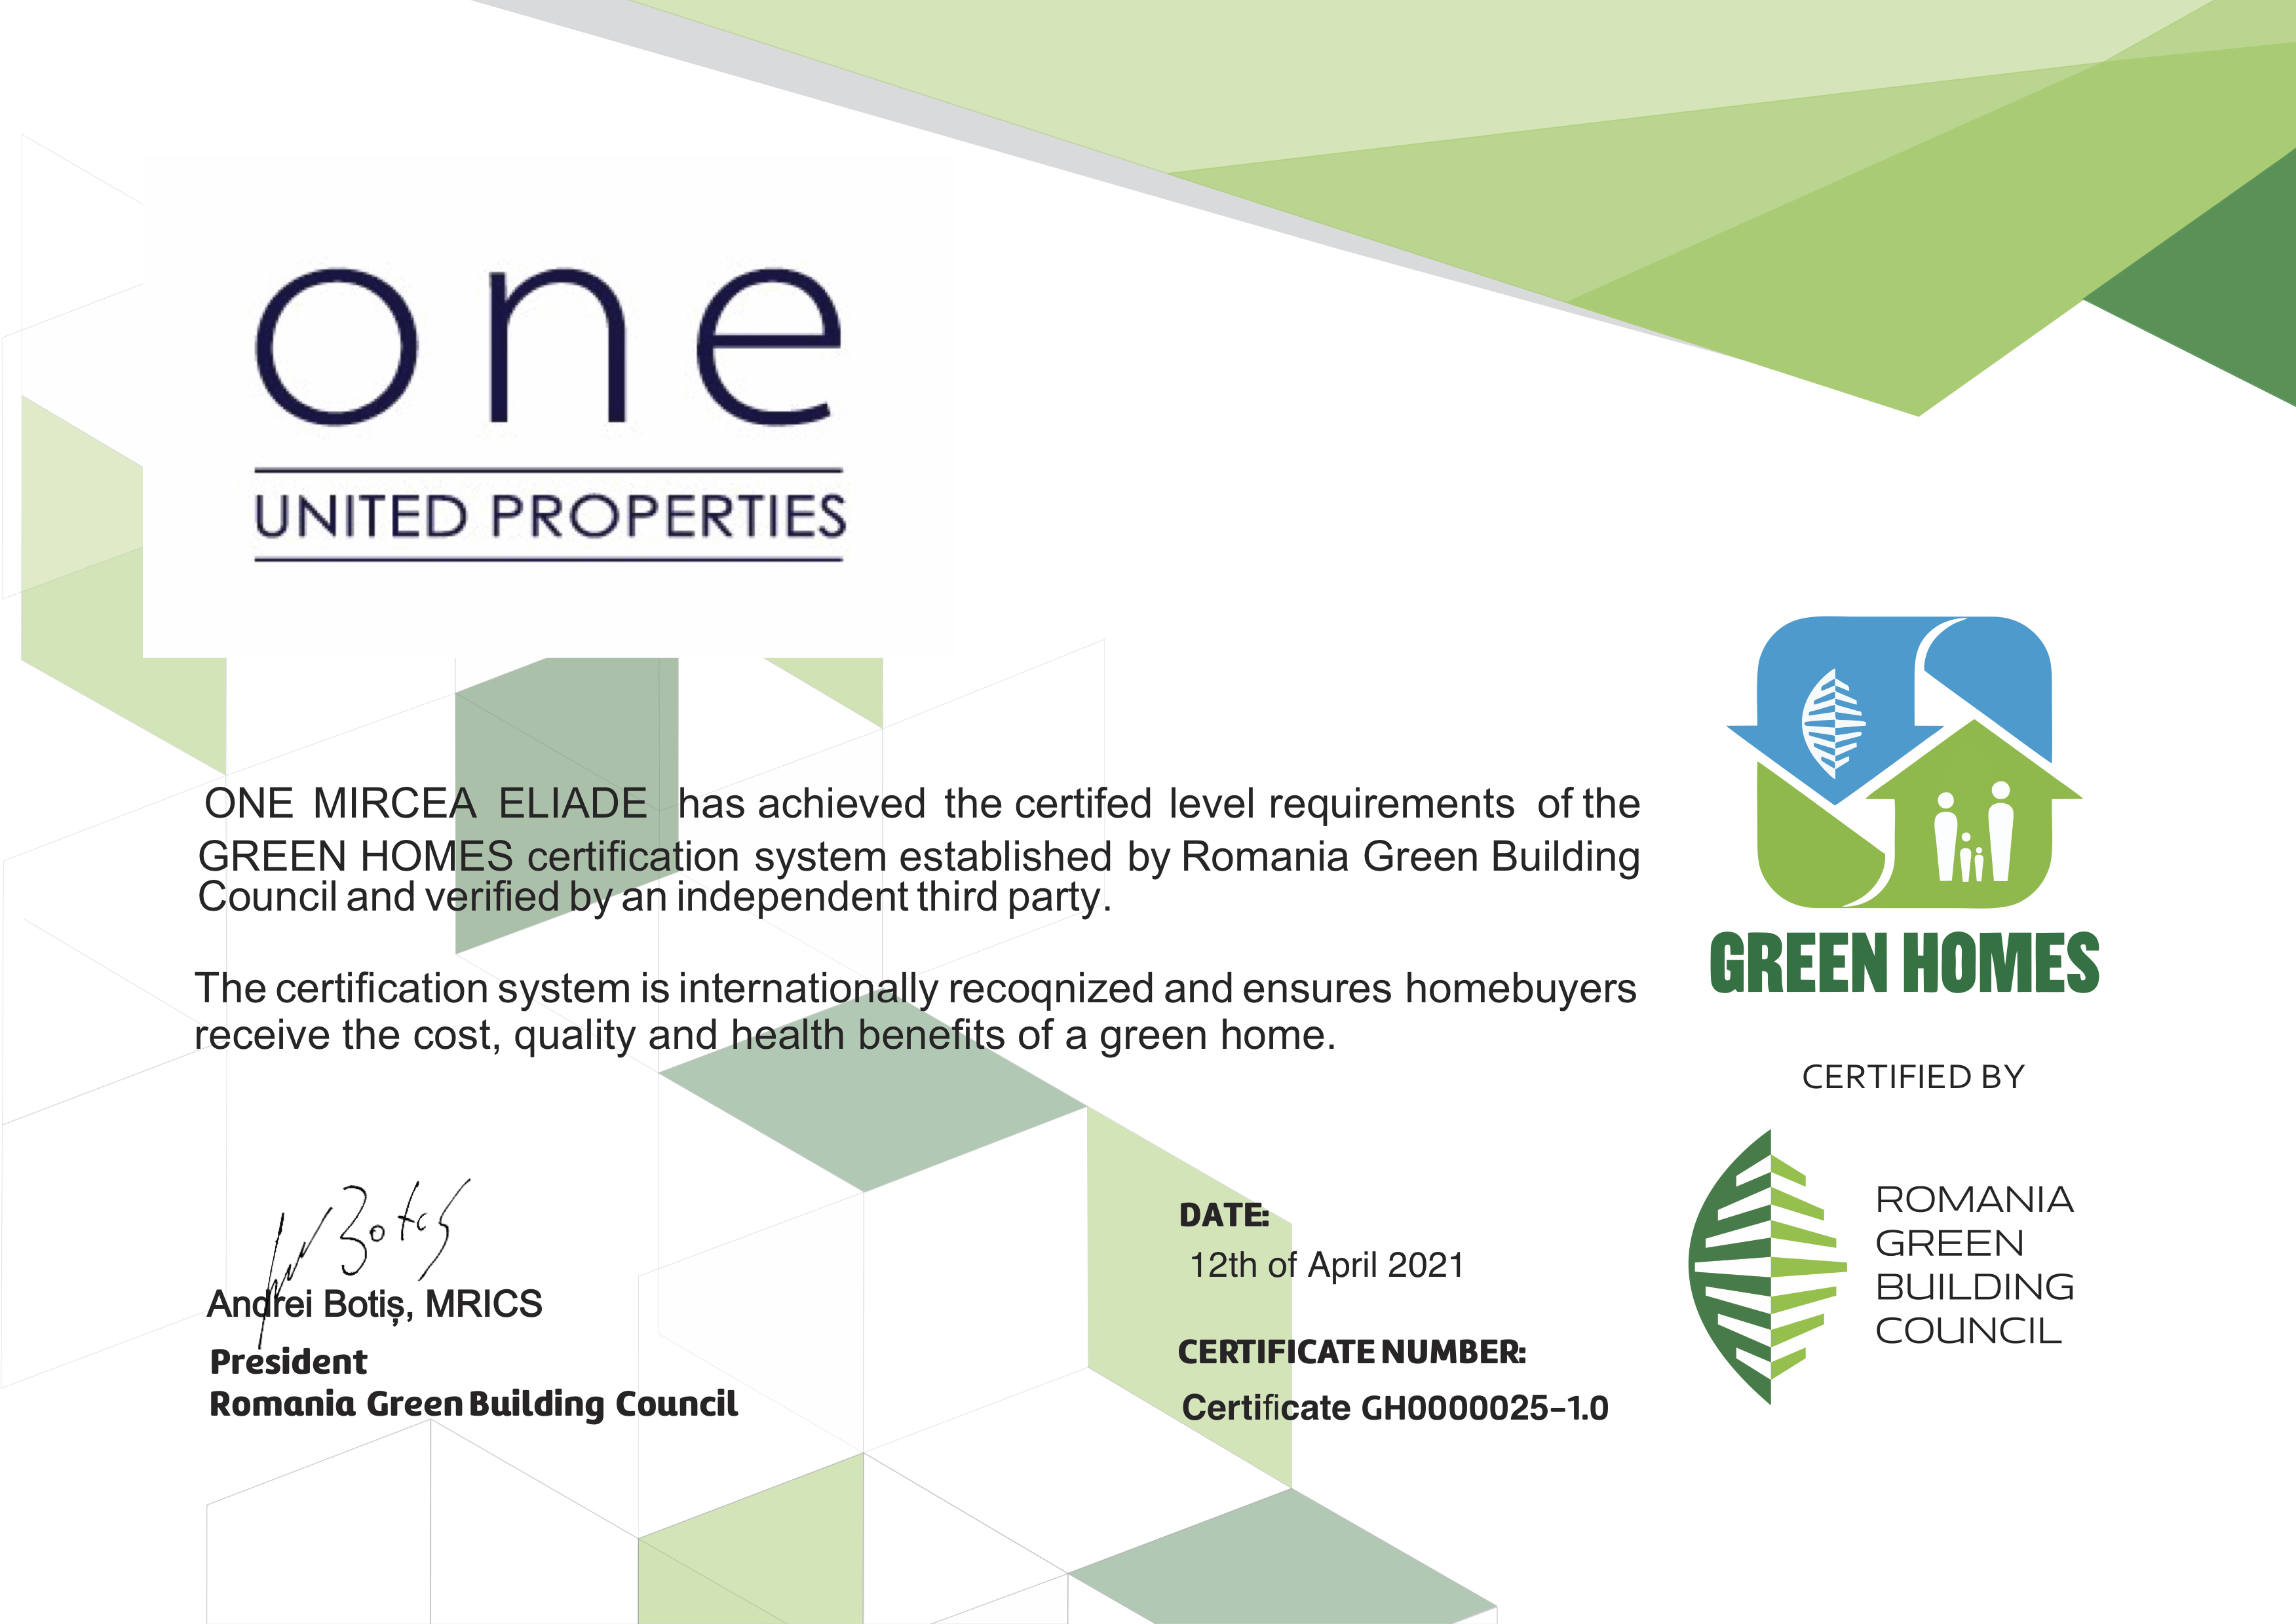 One Mircea Eliade received the "Green Homes" certification